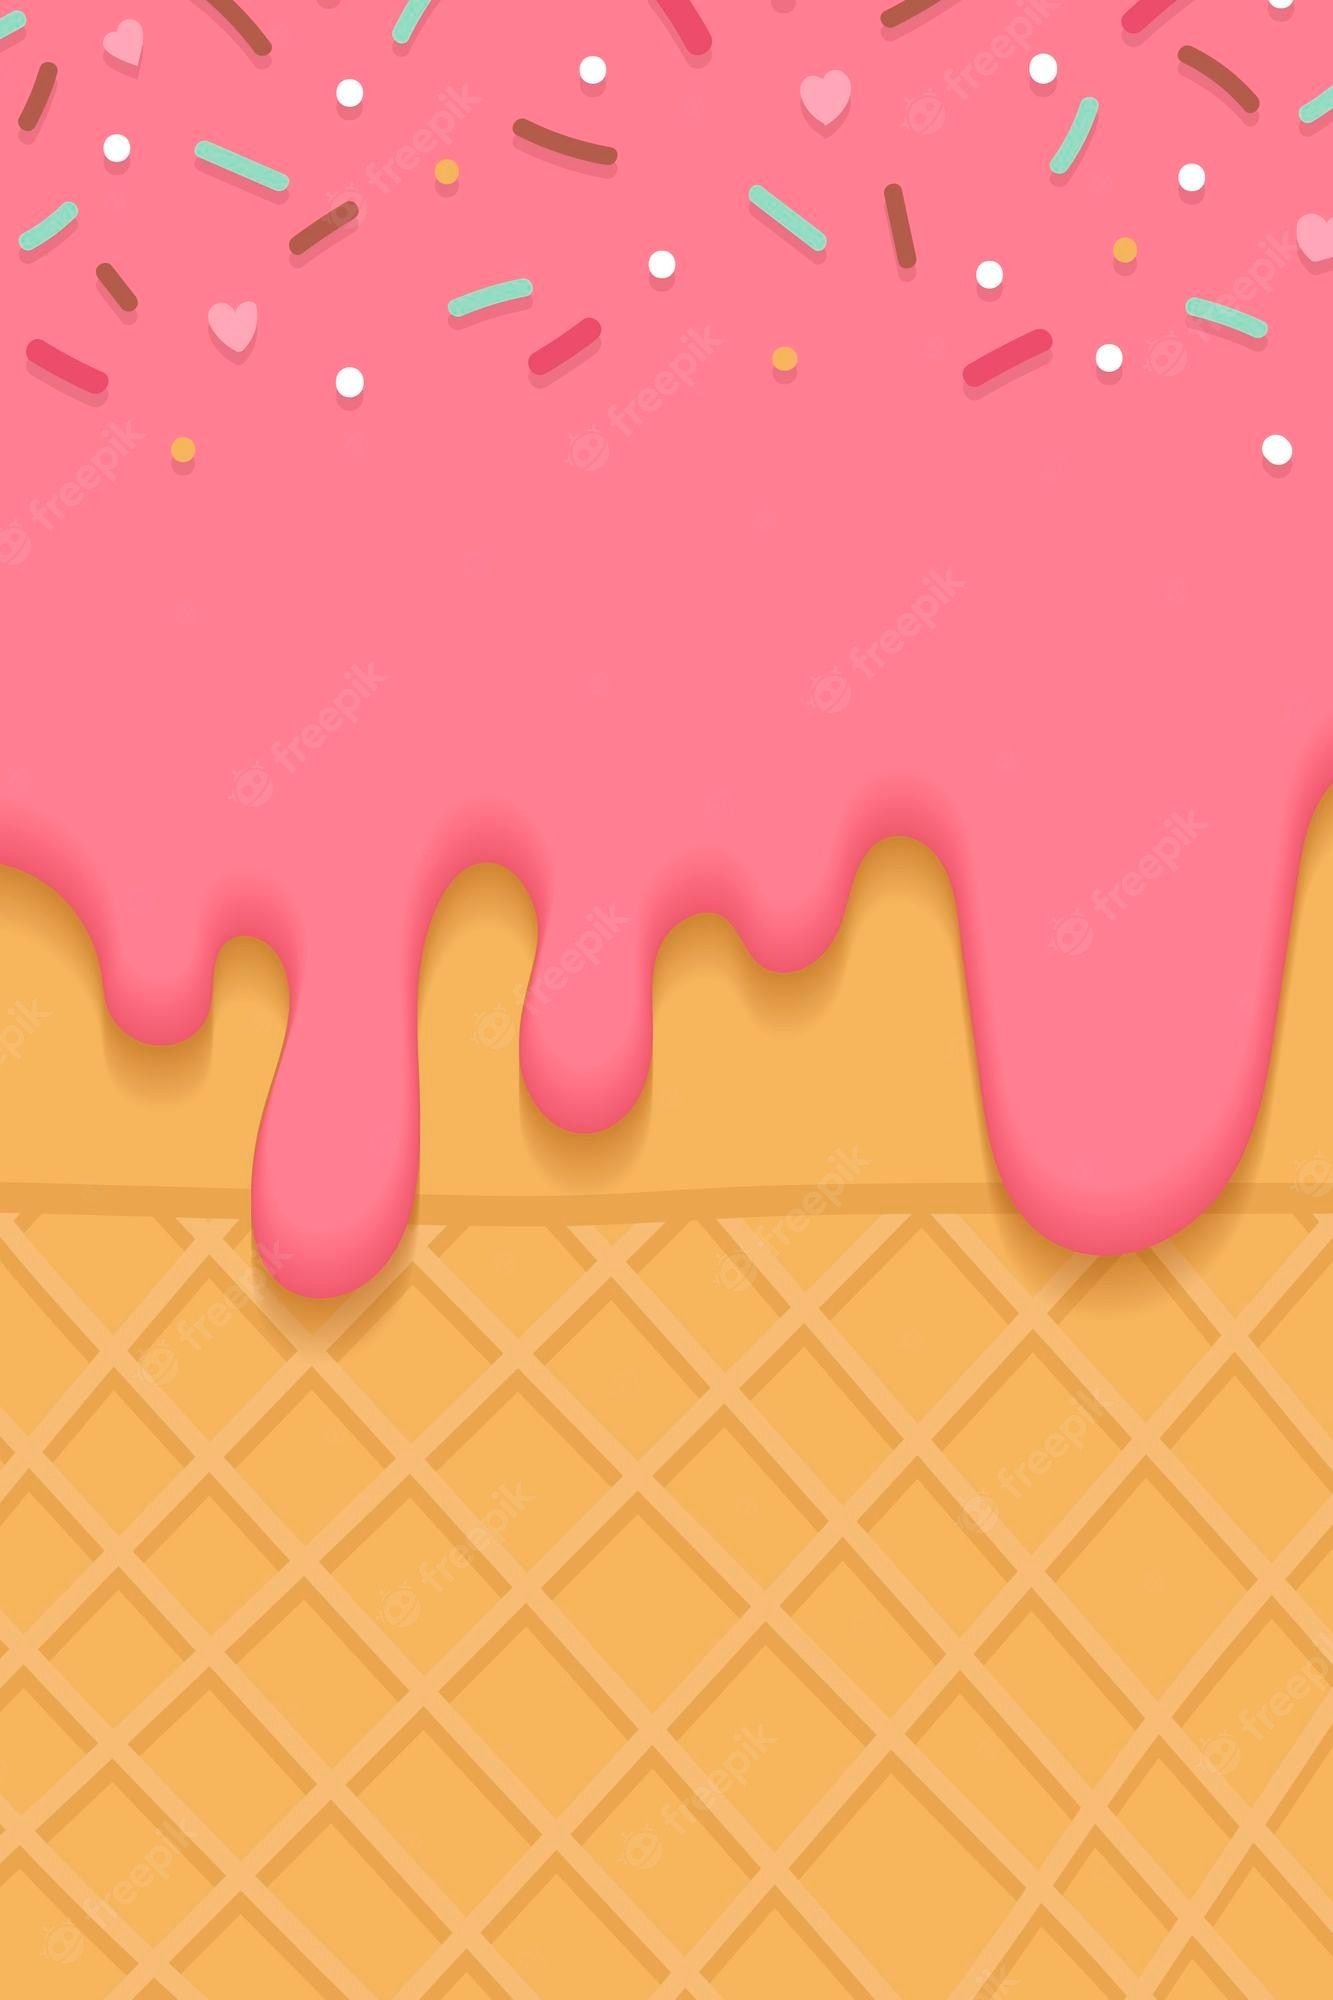 A pink ice cream with sprinkles on top and dripping over the side of the cone. - Ice cream, foodie